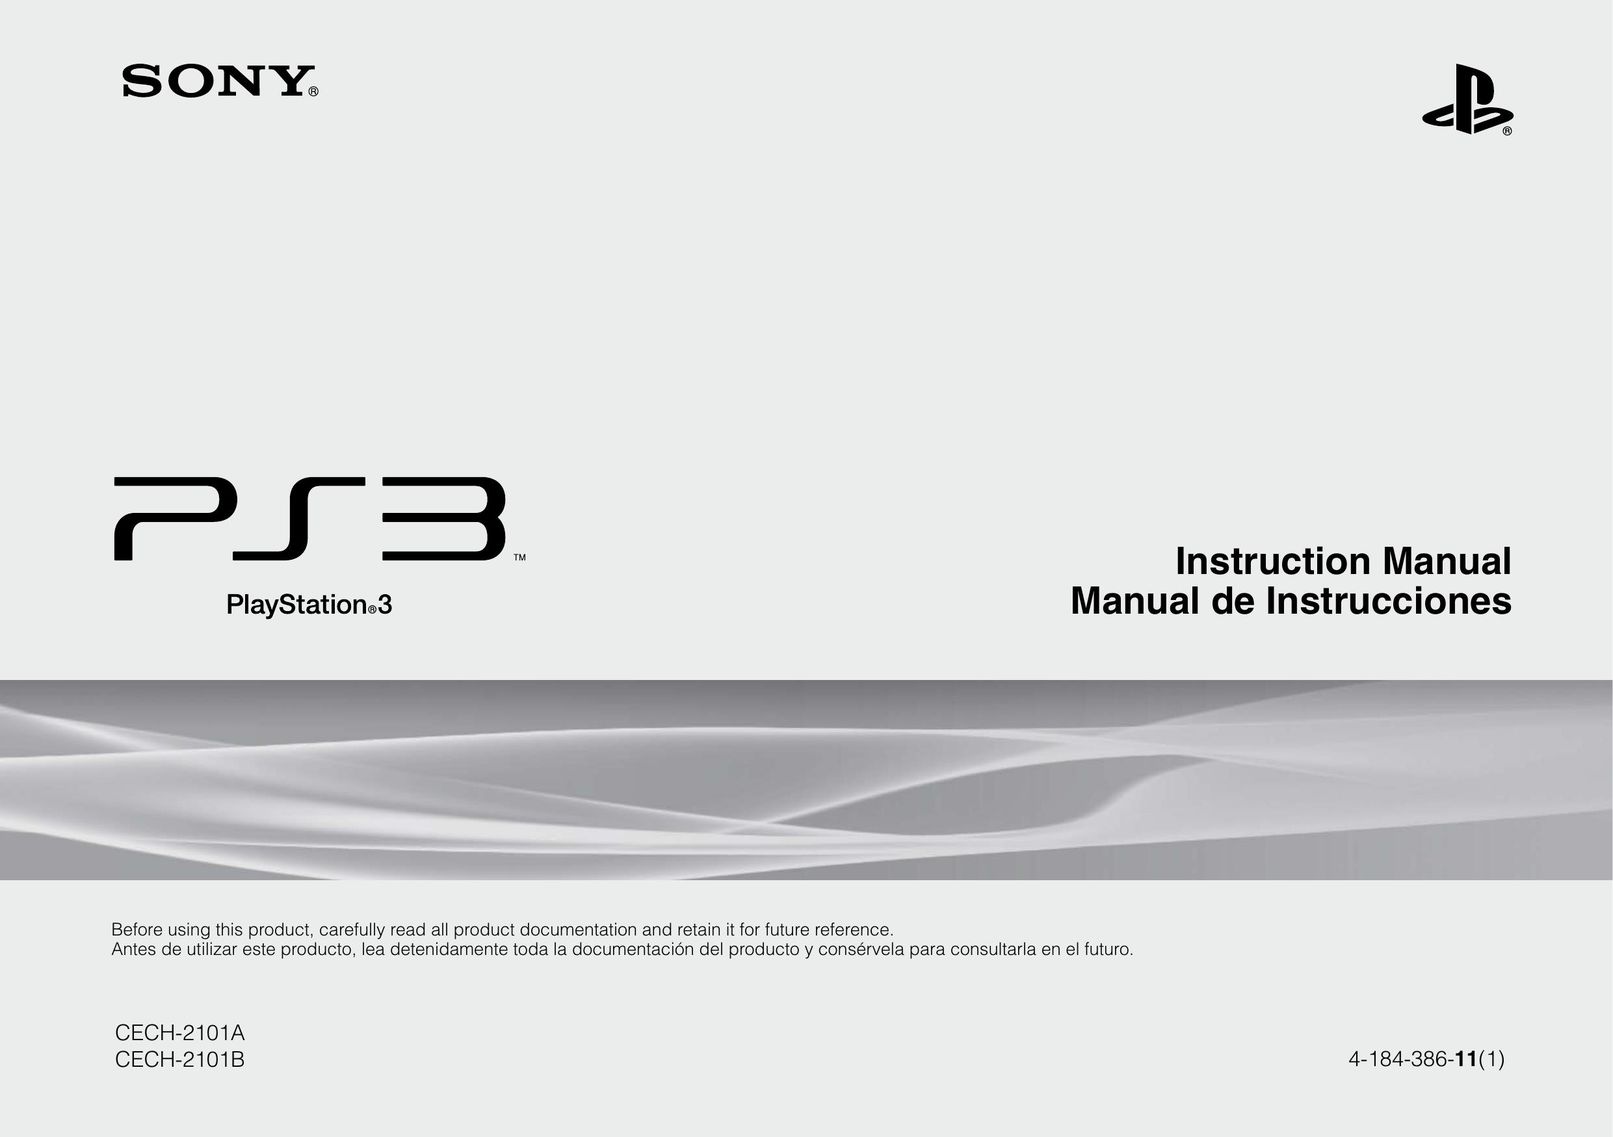 Sony 4-184-386-11 Video Game Console User Manual